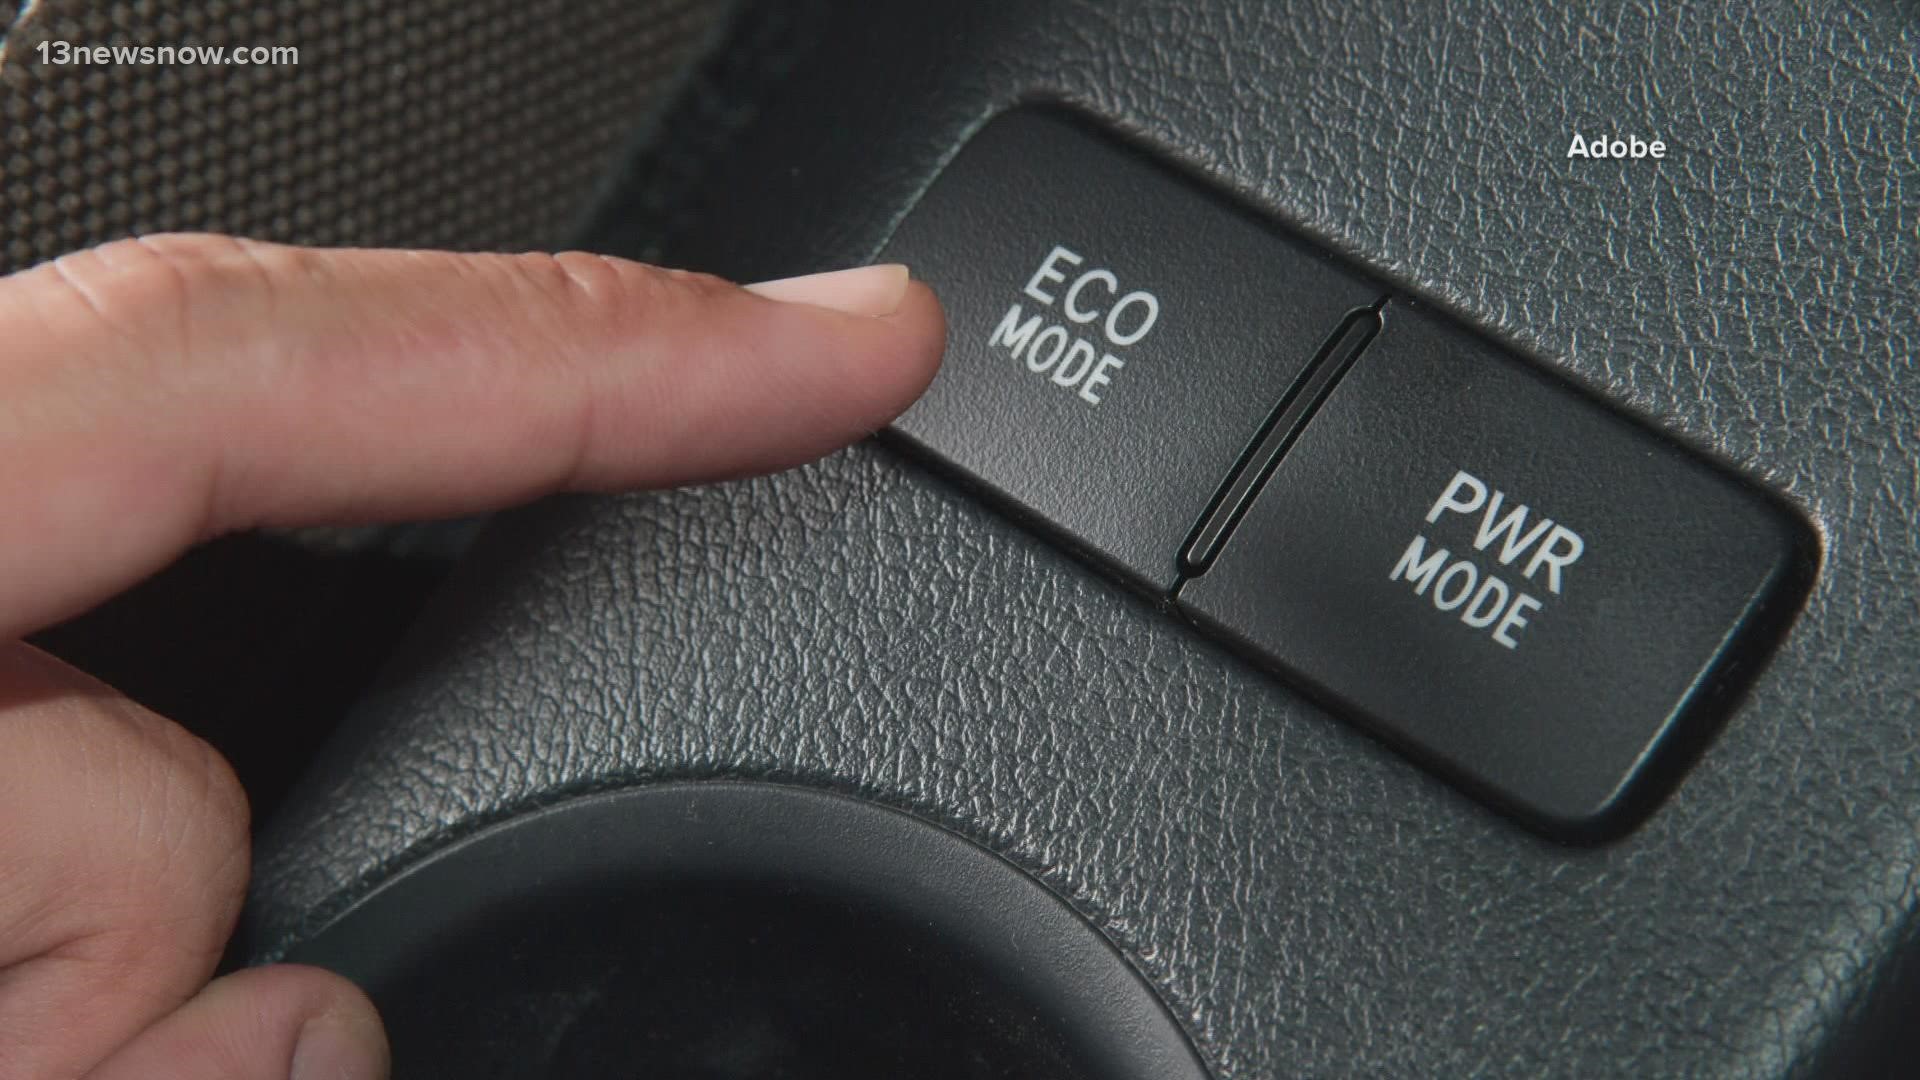 Could your car's "eco mode" actually keep more money in your wallet?